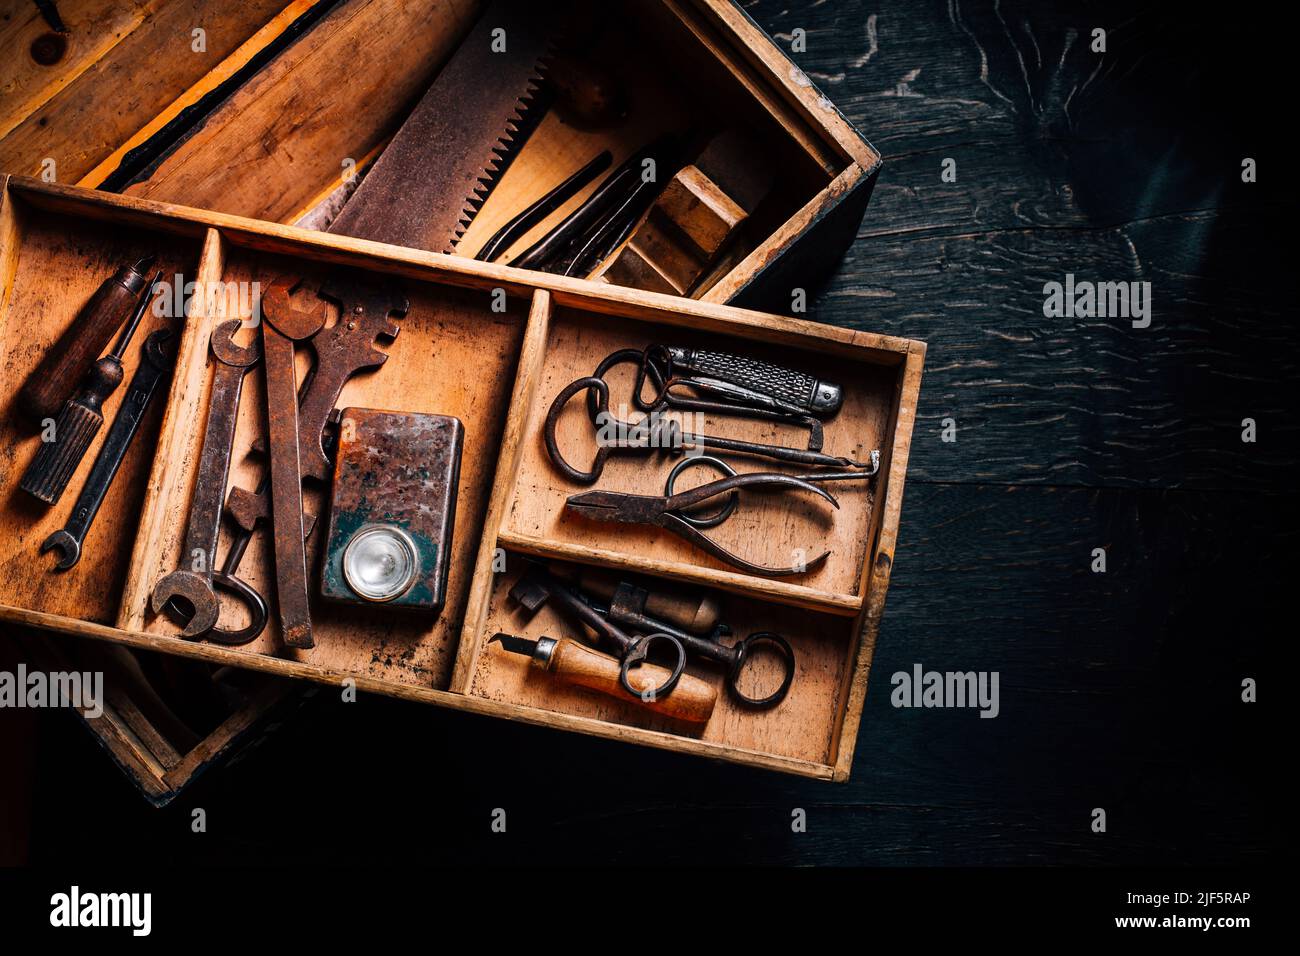 Collection of vintage carpentry tools in old wooden chest: woodworking, craftsmanship and handwork concept Stock Photo